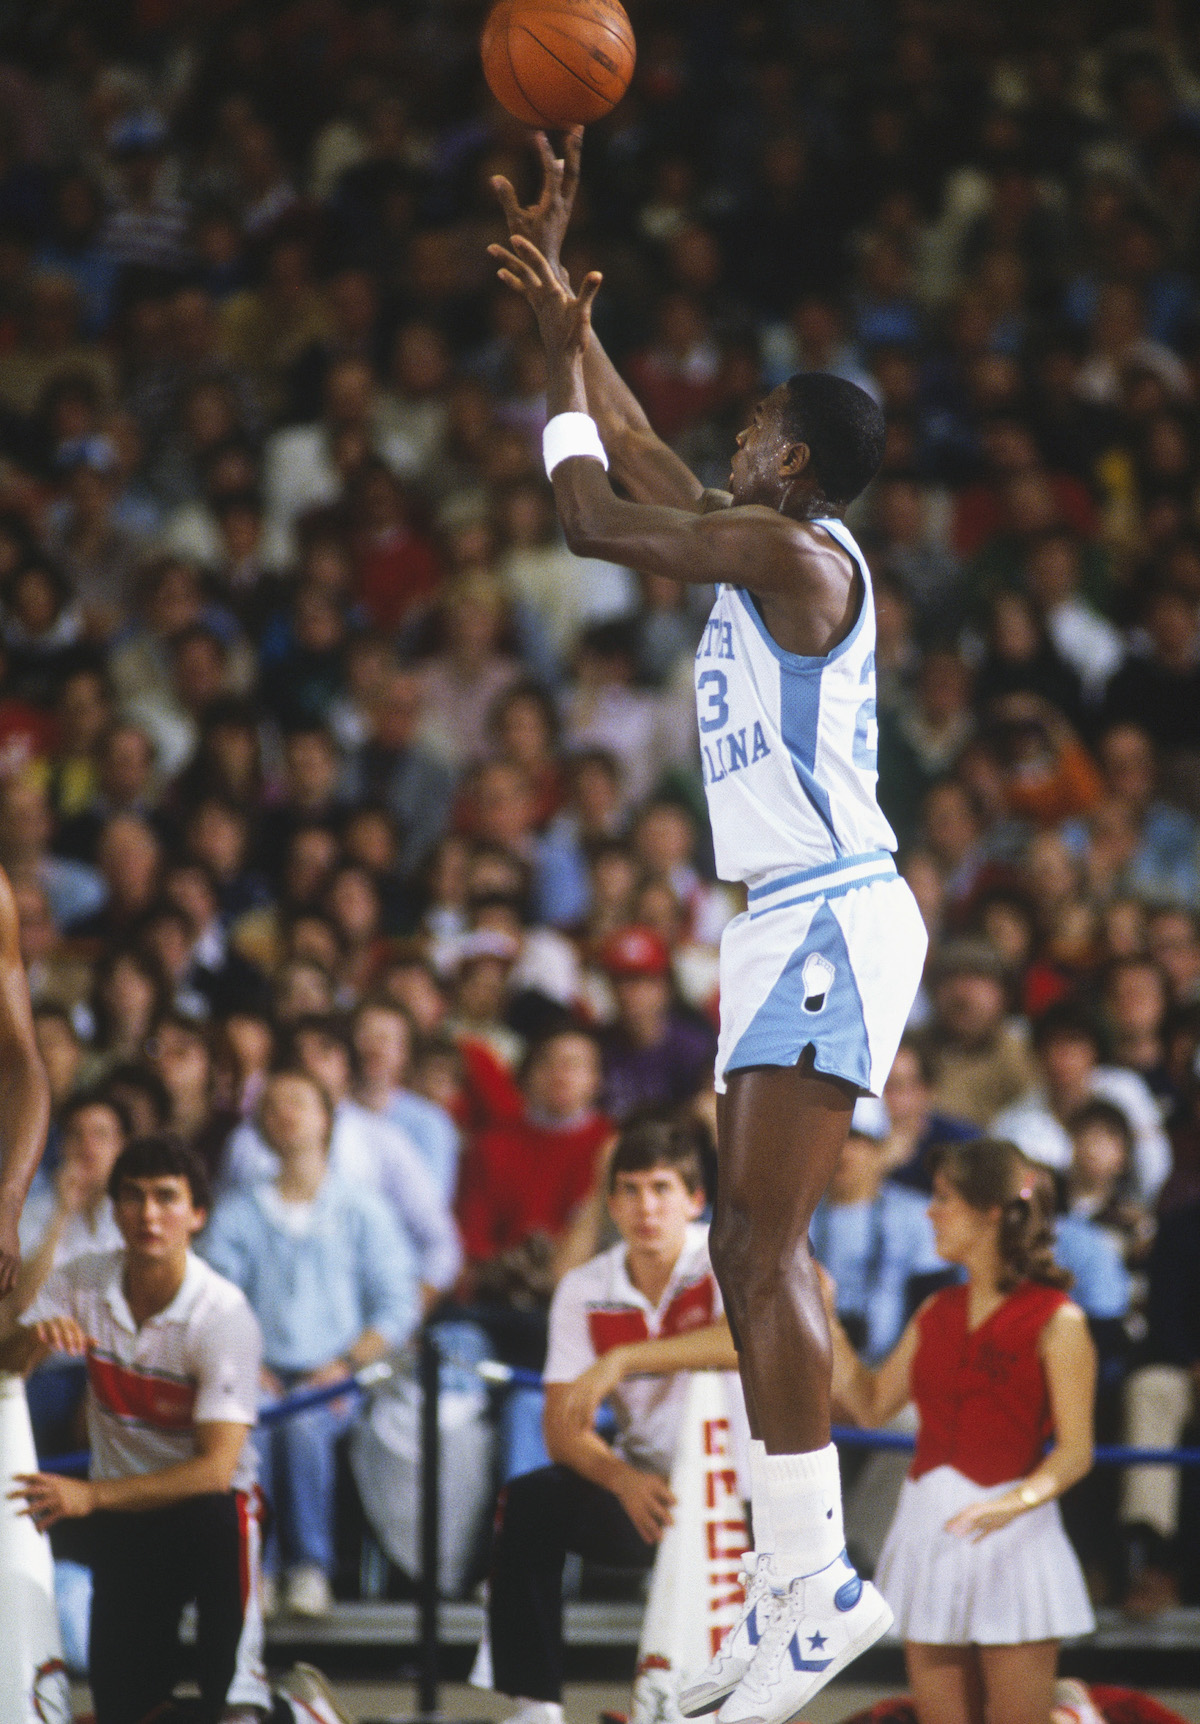 Michael Jordan’s Game-Worn UNC Converse From His 1982 Championship-Winning Freshman Year Are Set to Sell for $100K